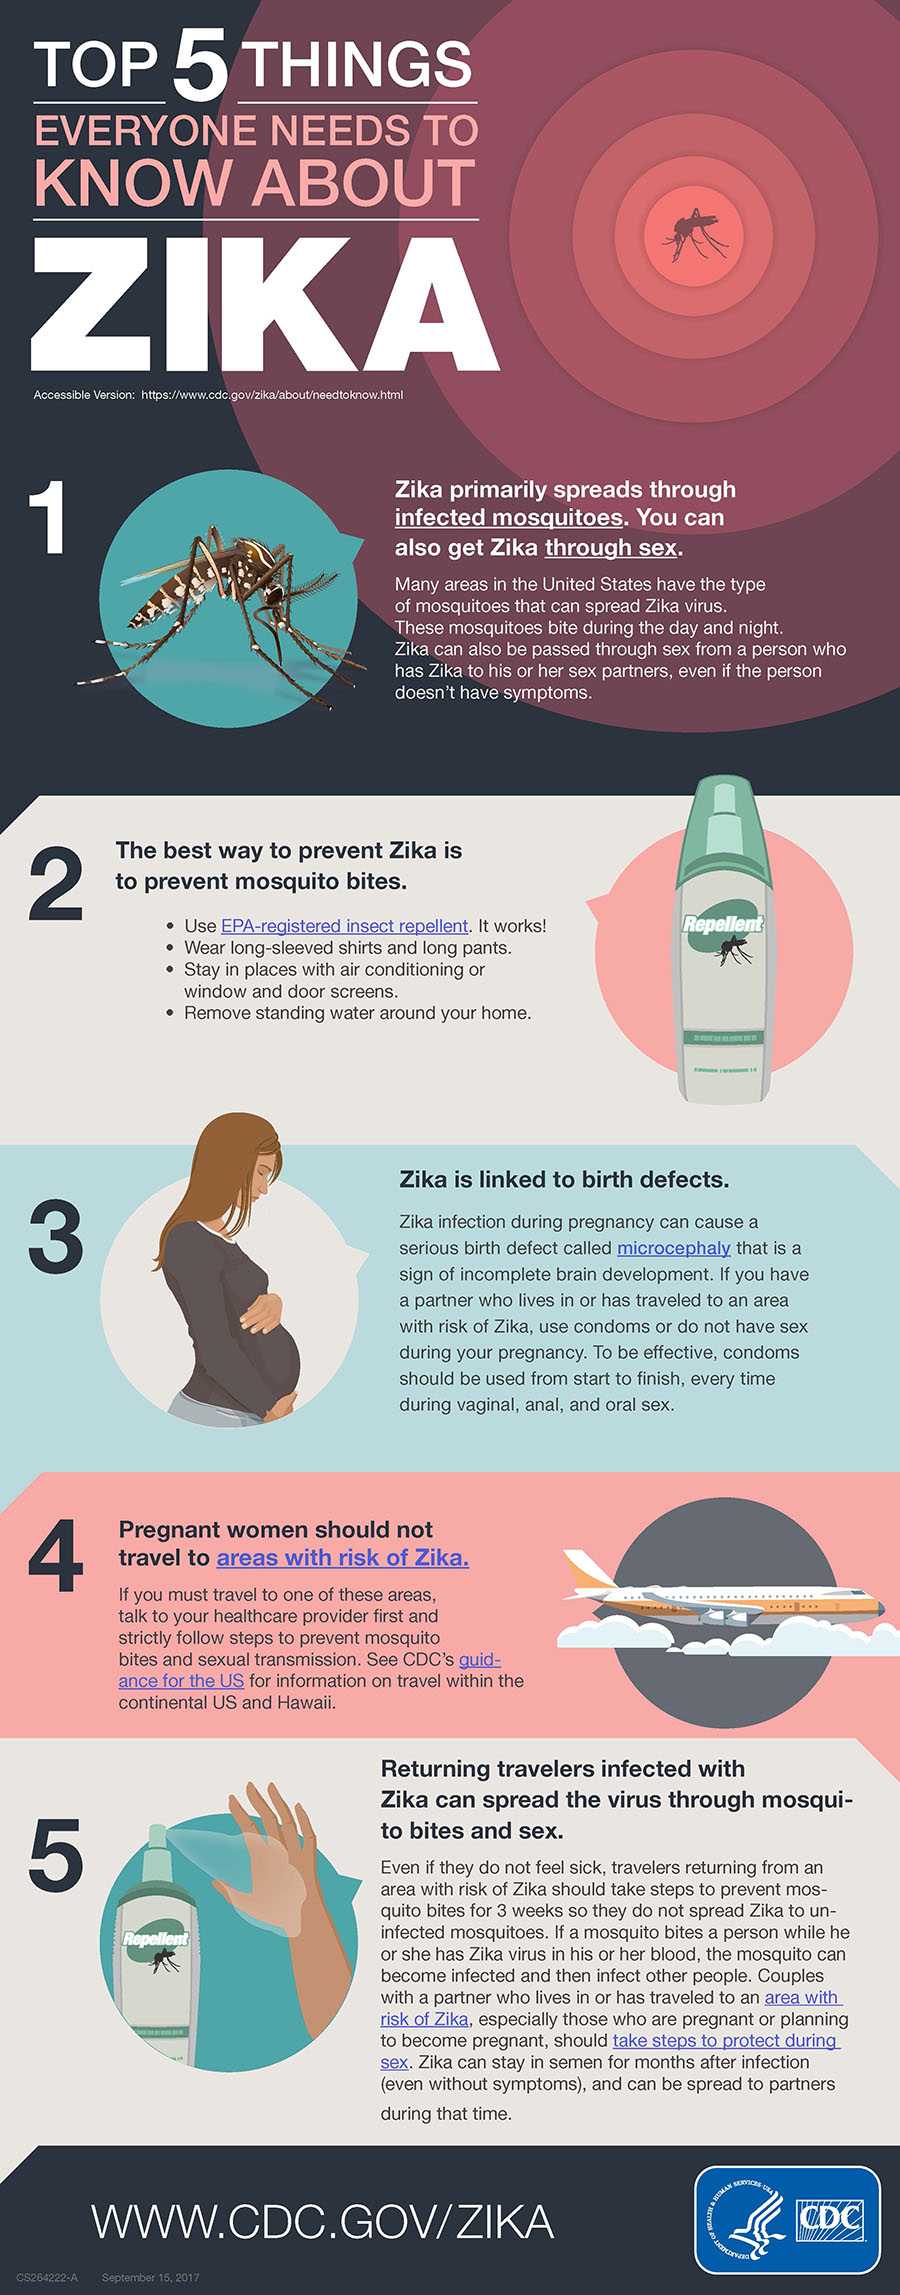 Top 5 Things Everyone Needs to Know About Zika